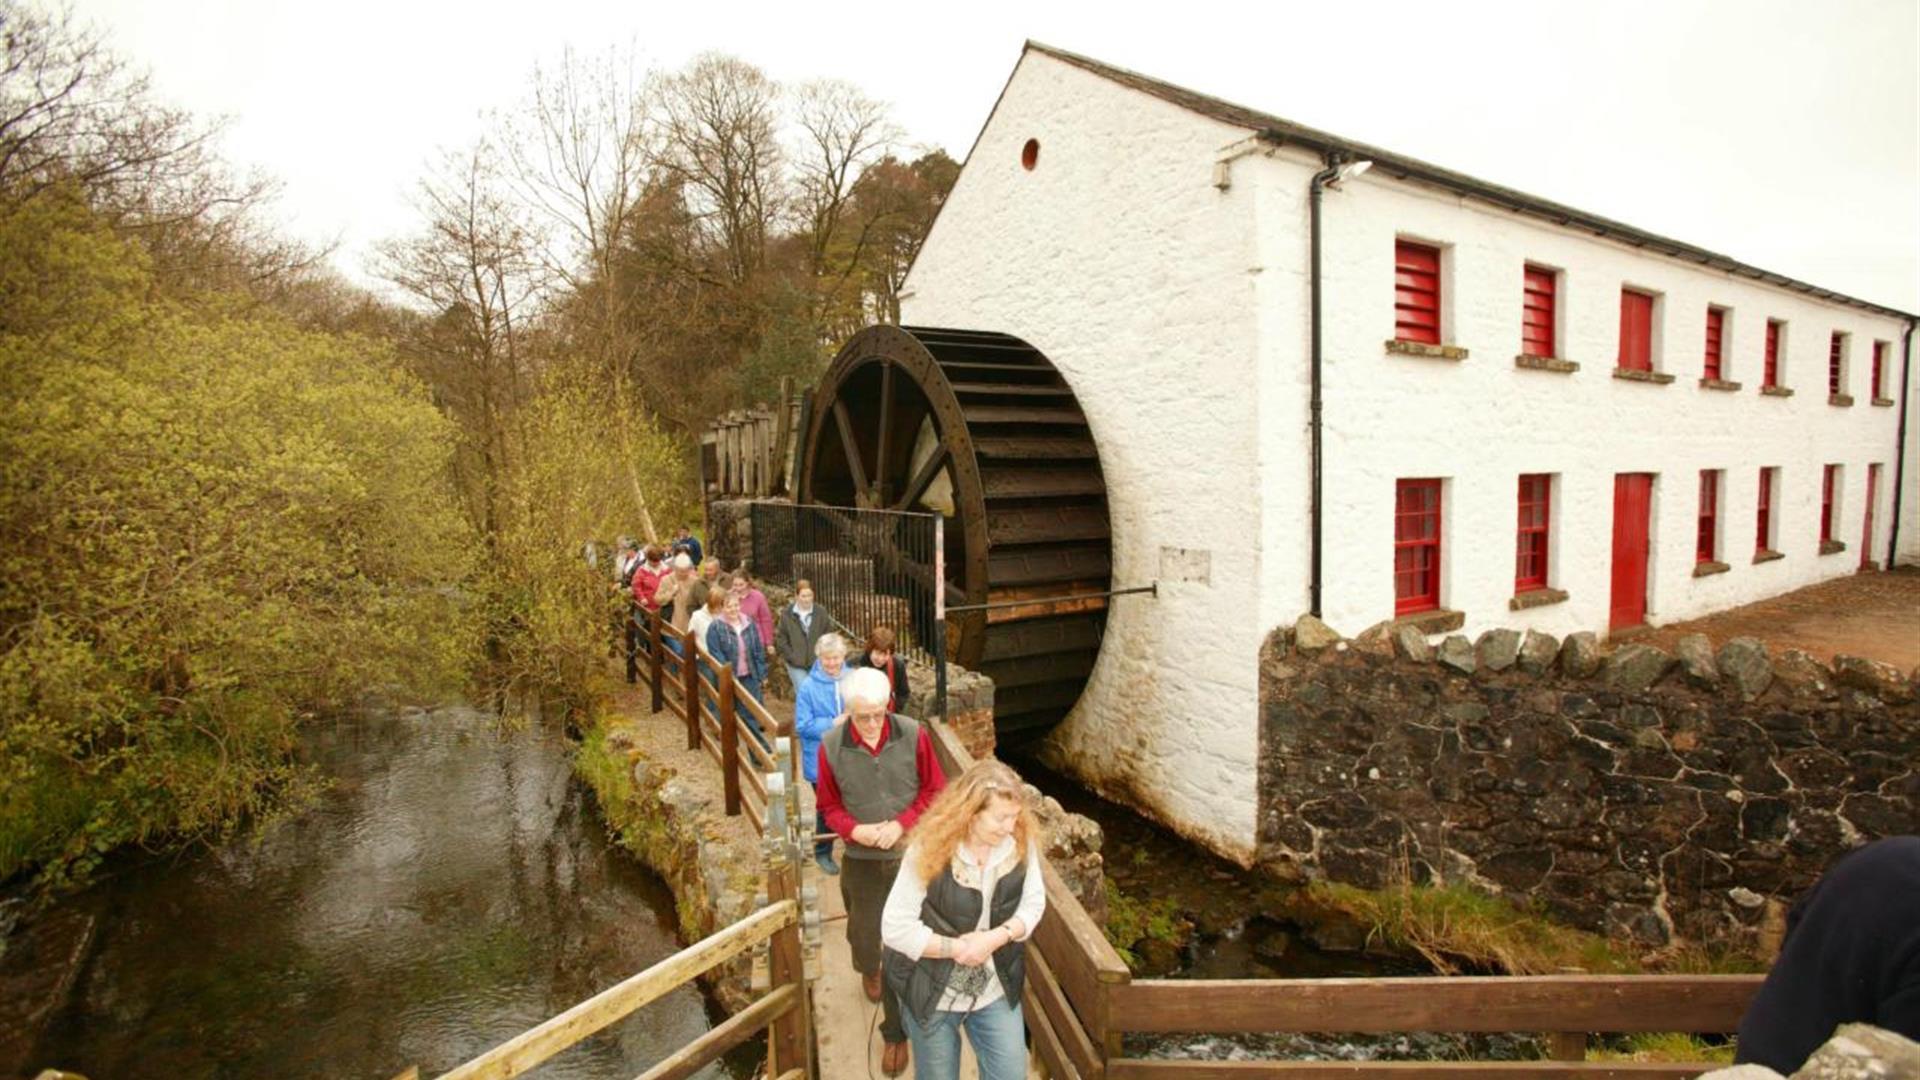 A group of people walking past the water wheel at Wellbrooke